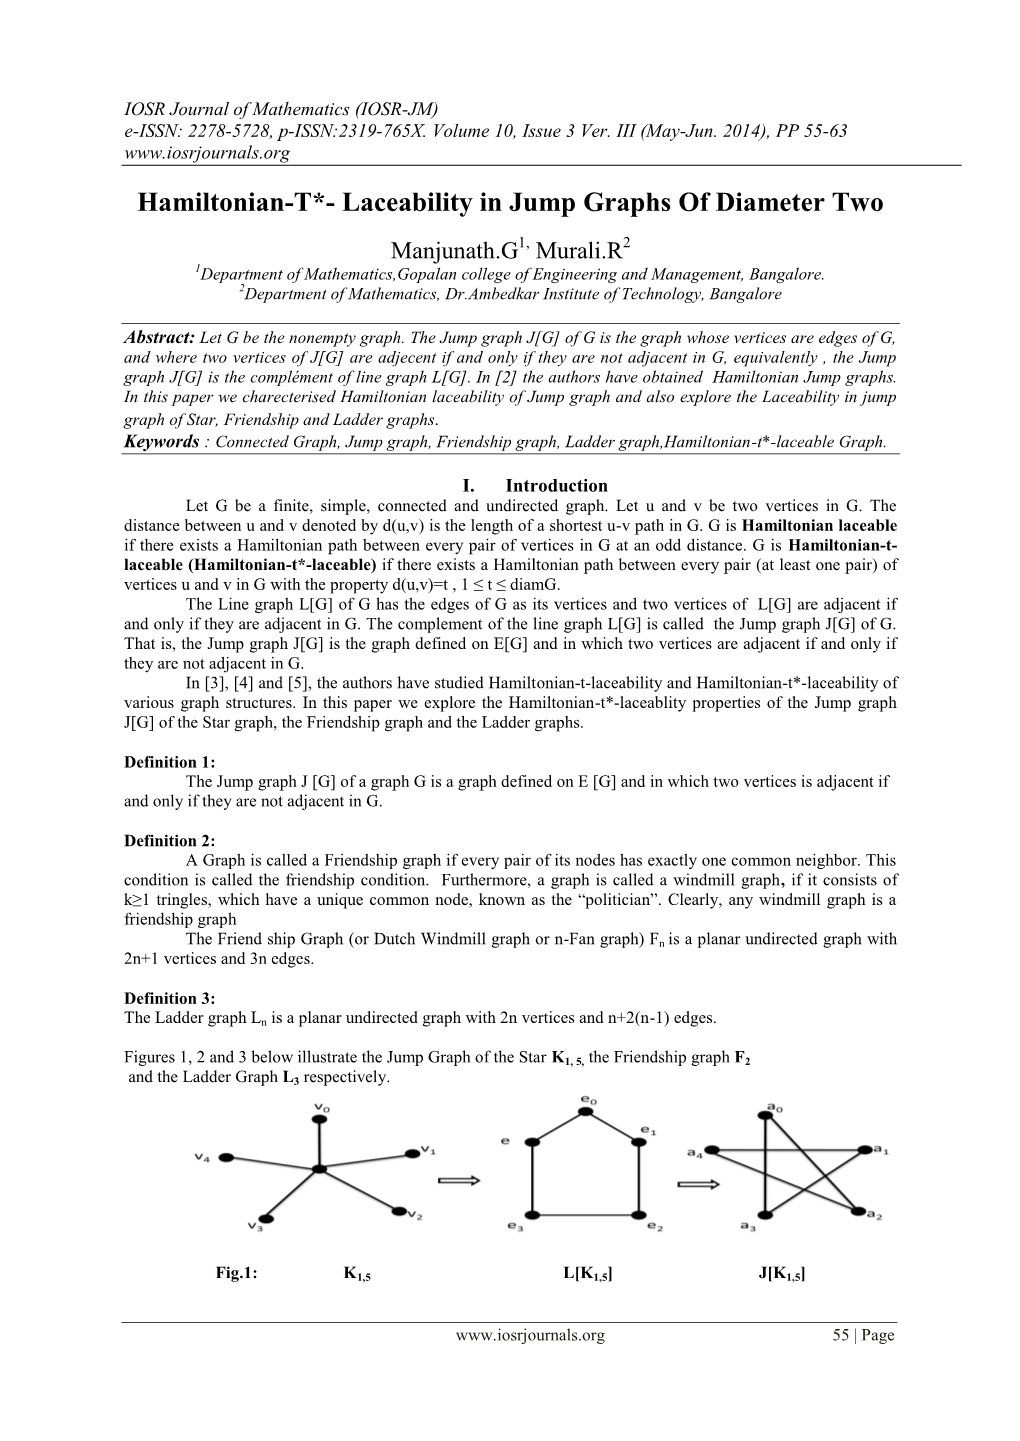 Hamiltonian-T*- Laceability in Jump Graphs of Diameter Two